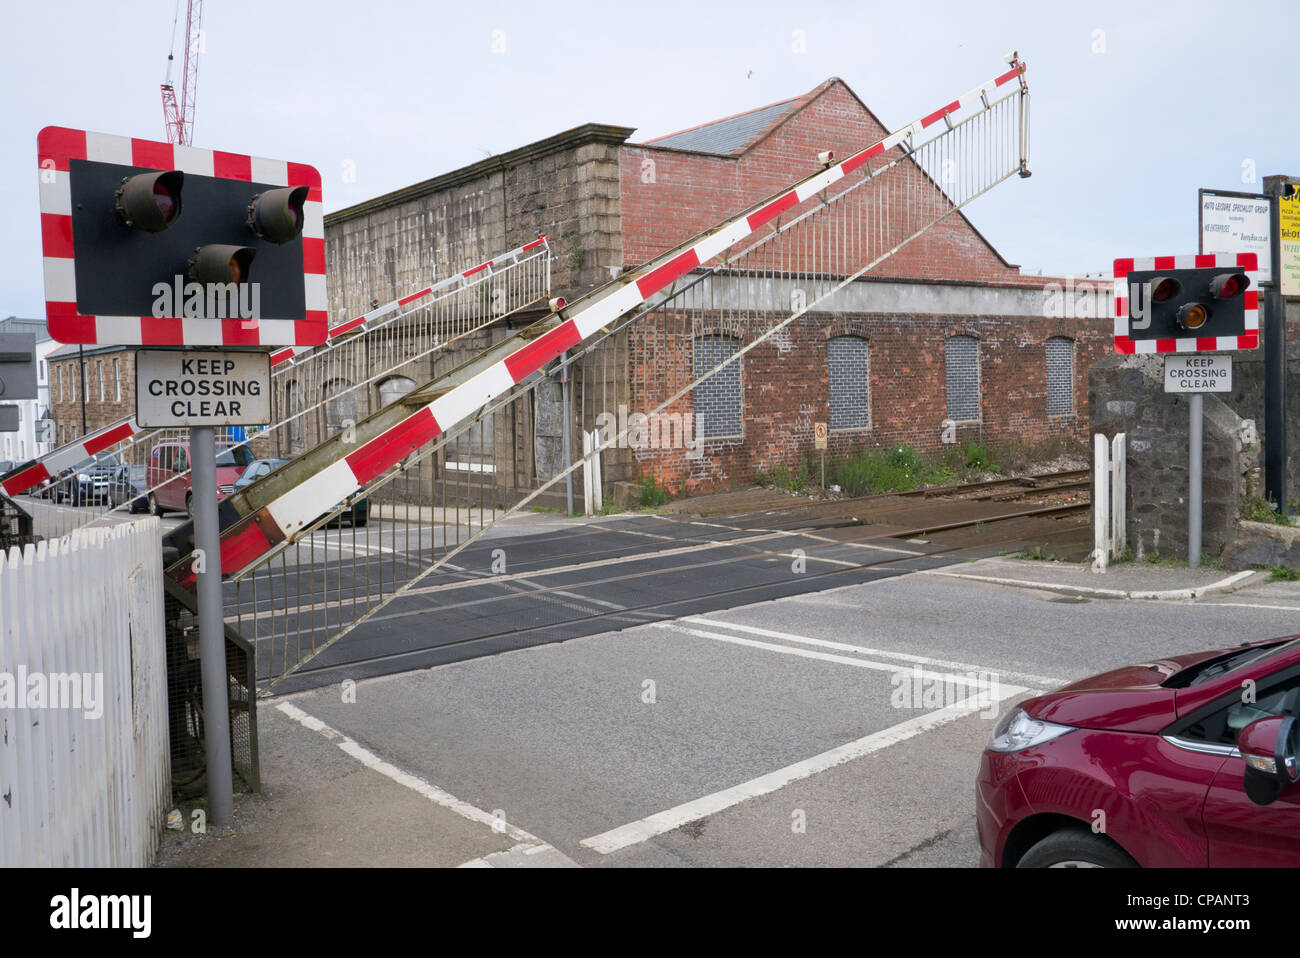 British Railway Level Crossing Barrier Gate Being Raised After A Train Has Passed Through In Camborne Uk Stock Photo Alamy